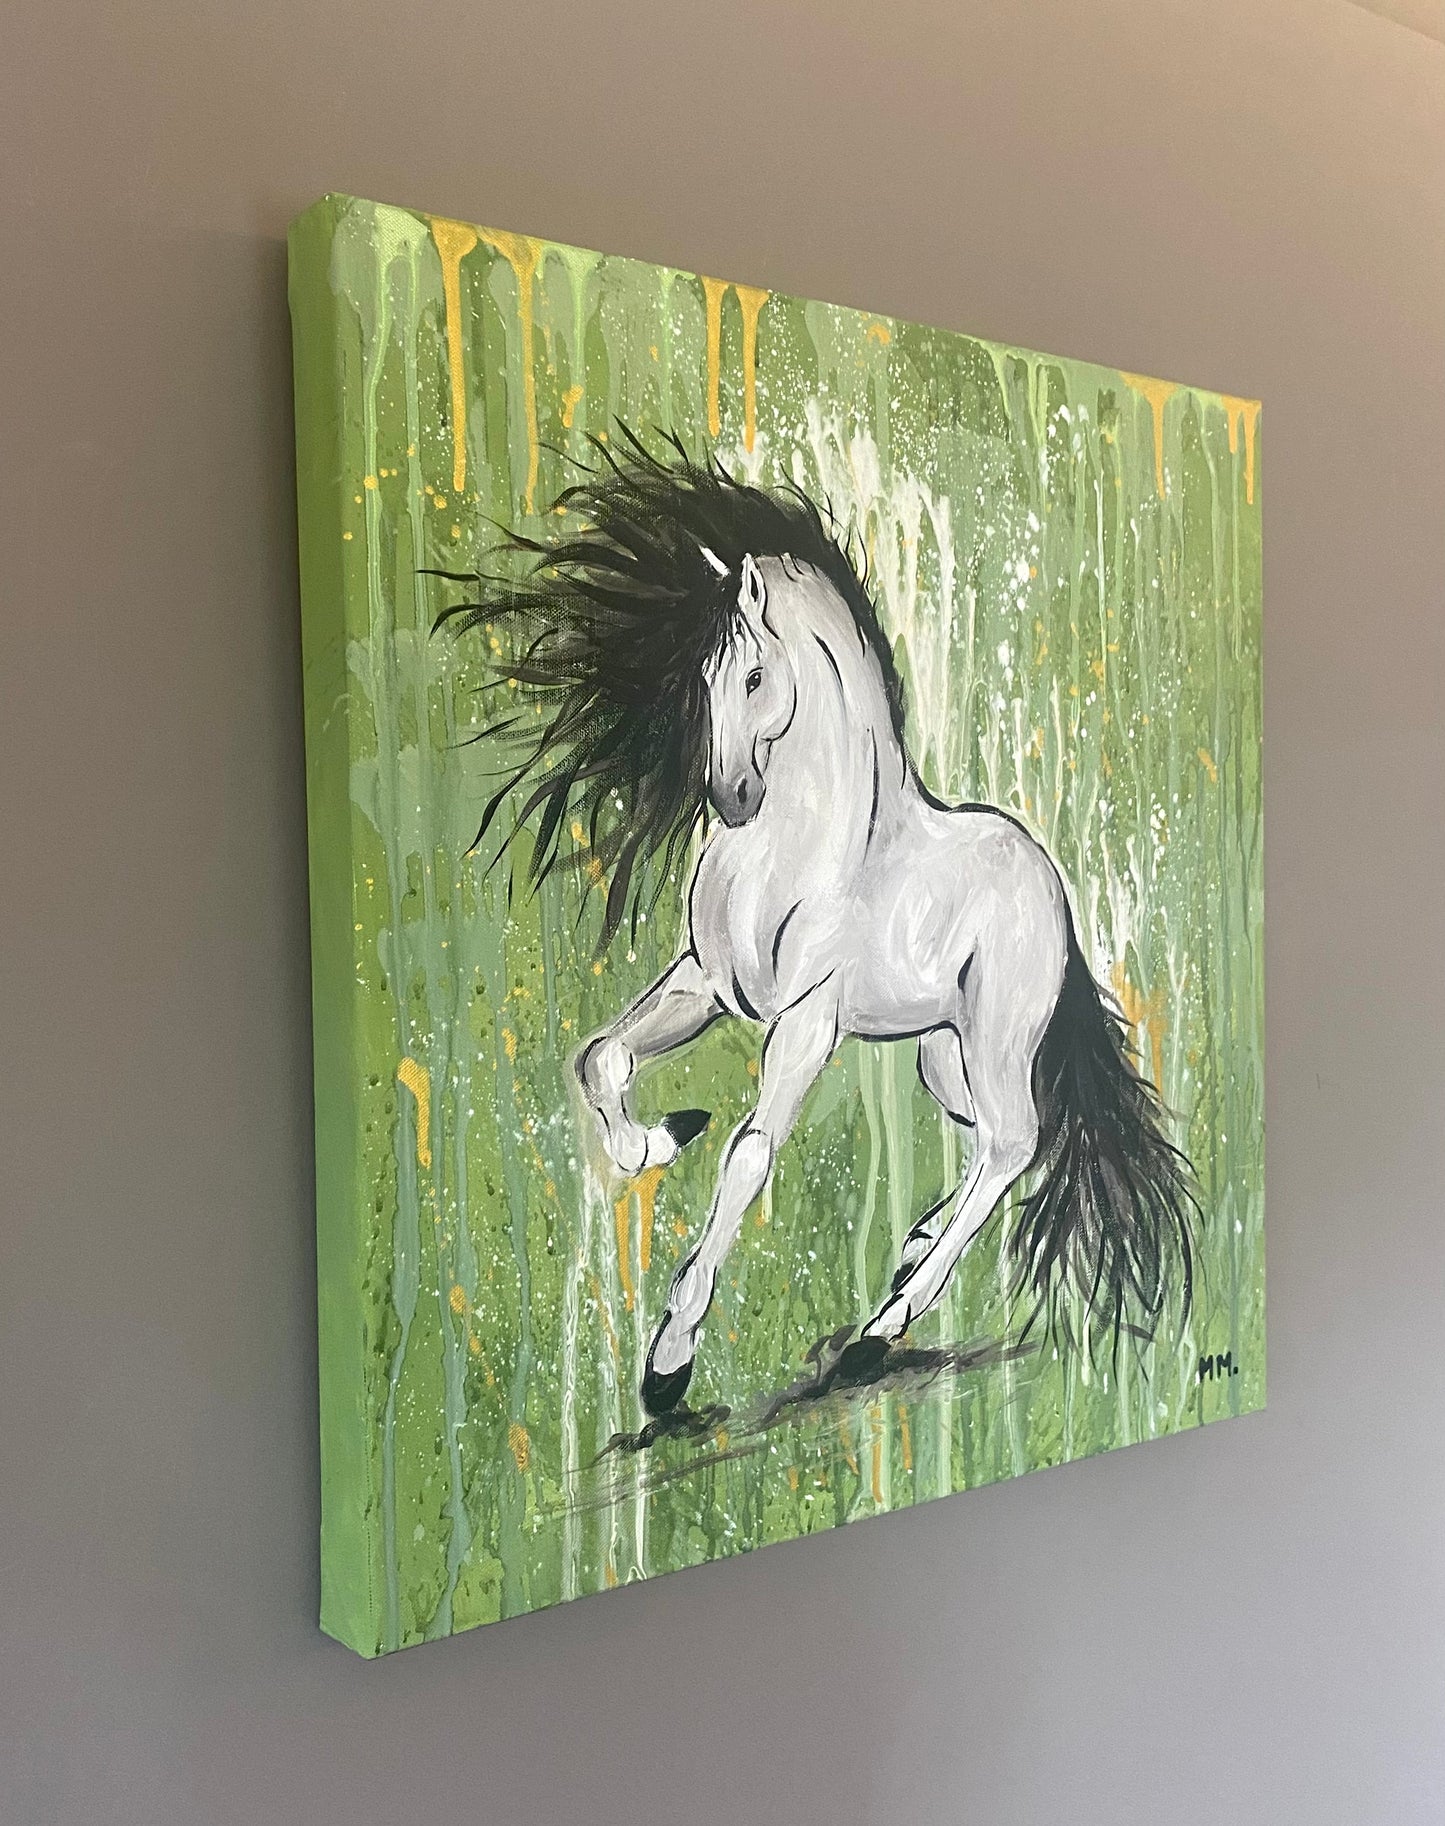 Original Handpainted Green White Gold Horse Painting On Canvas Artwork